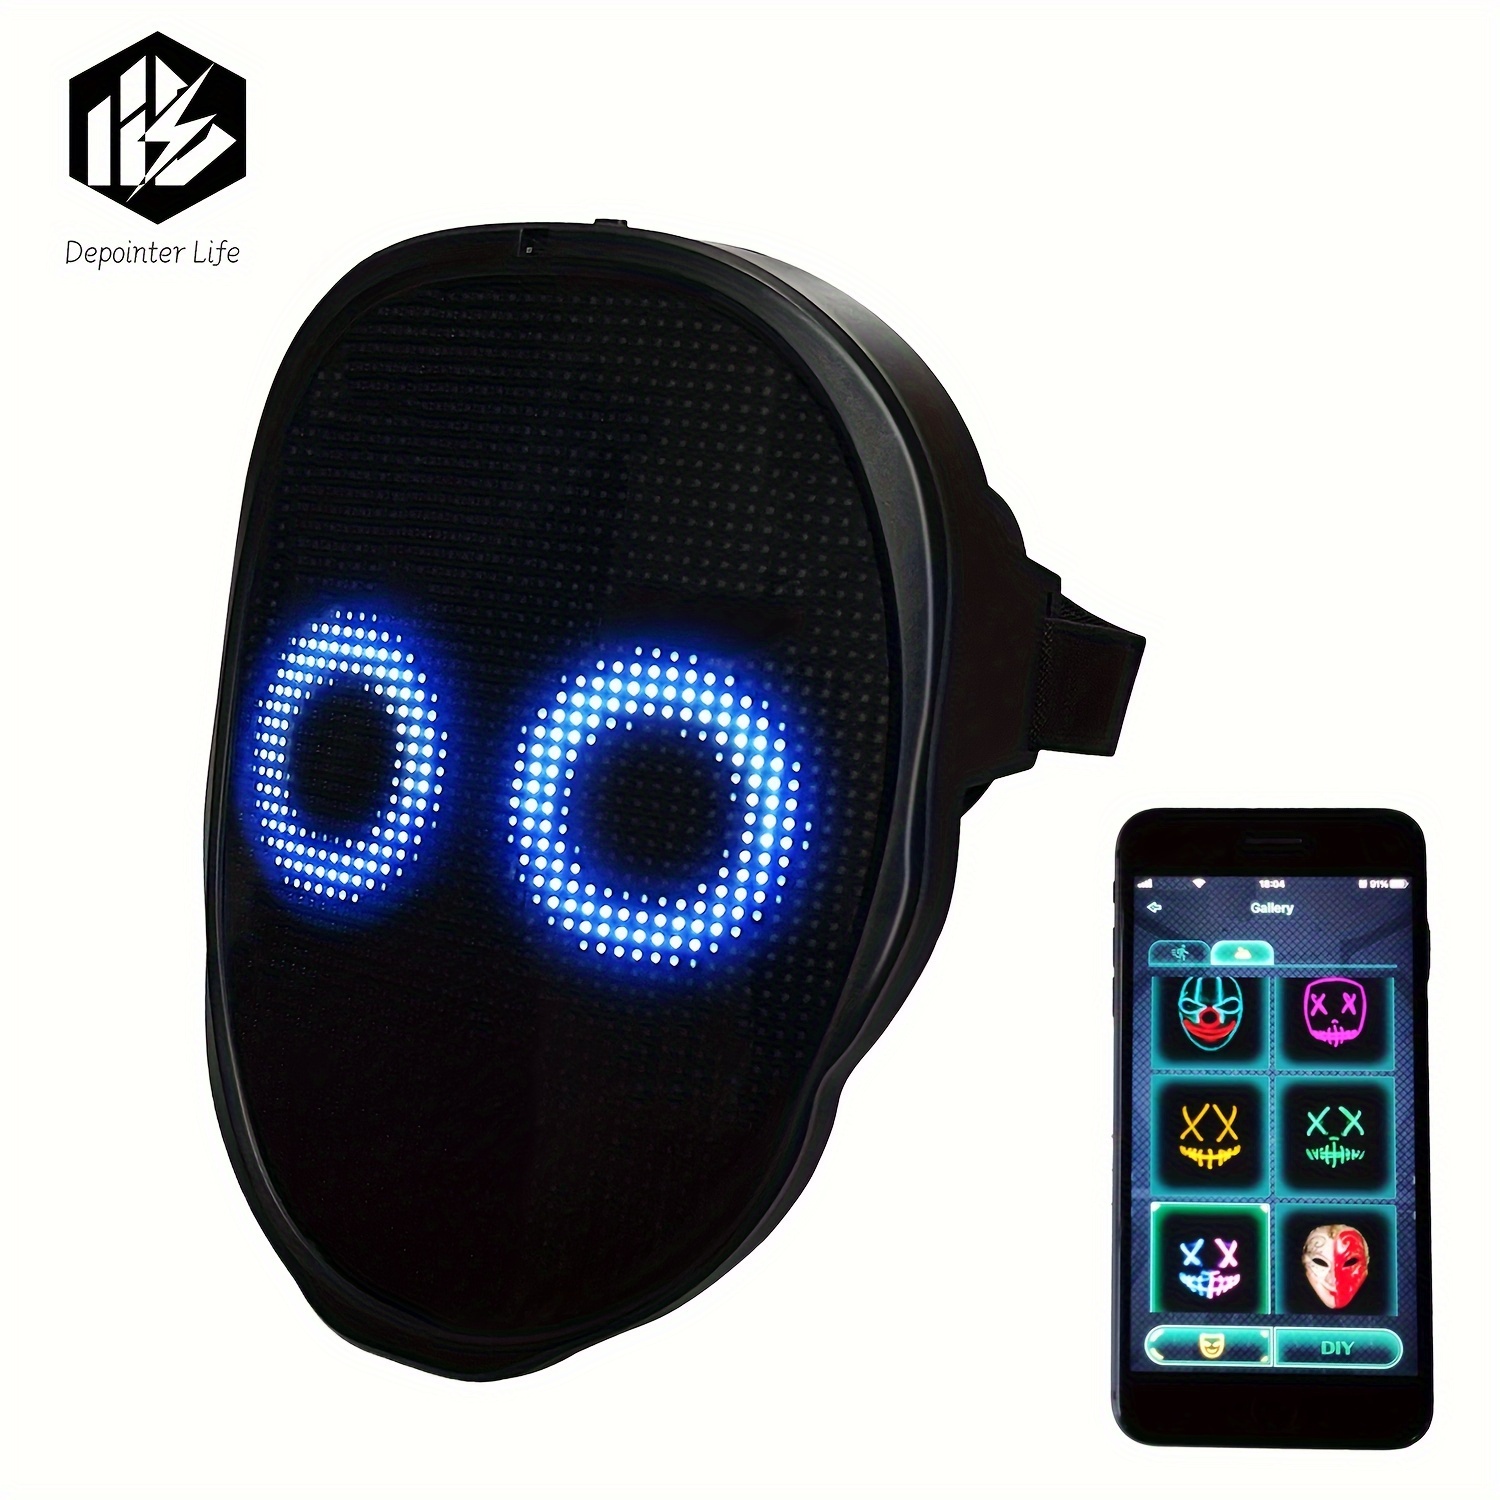 

Life Led Mask With App Controlled, Shining Mask, Lighted Face Transforming Mask, Led Light Up Halloween Mask For Adults